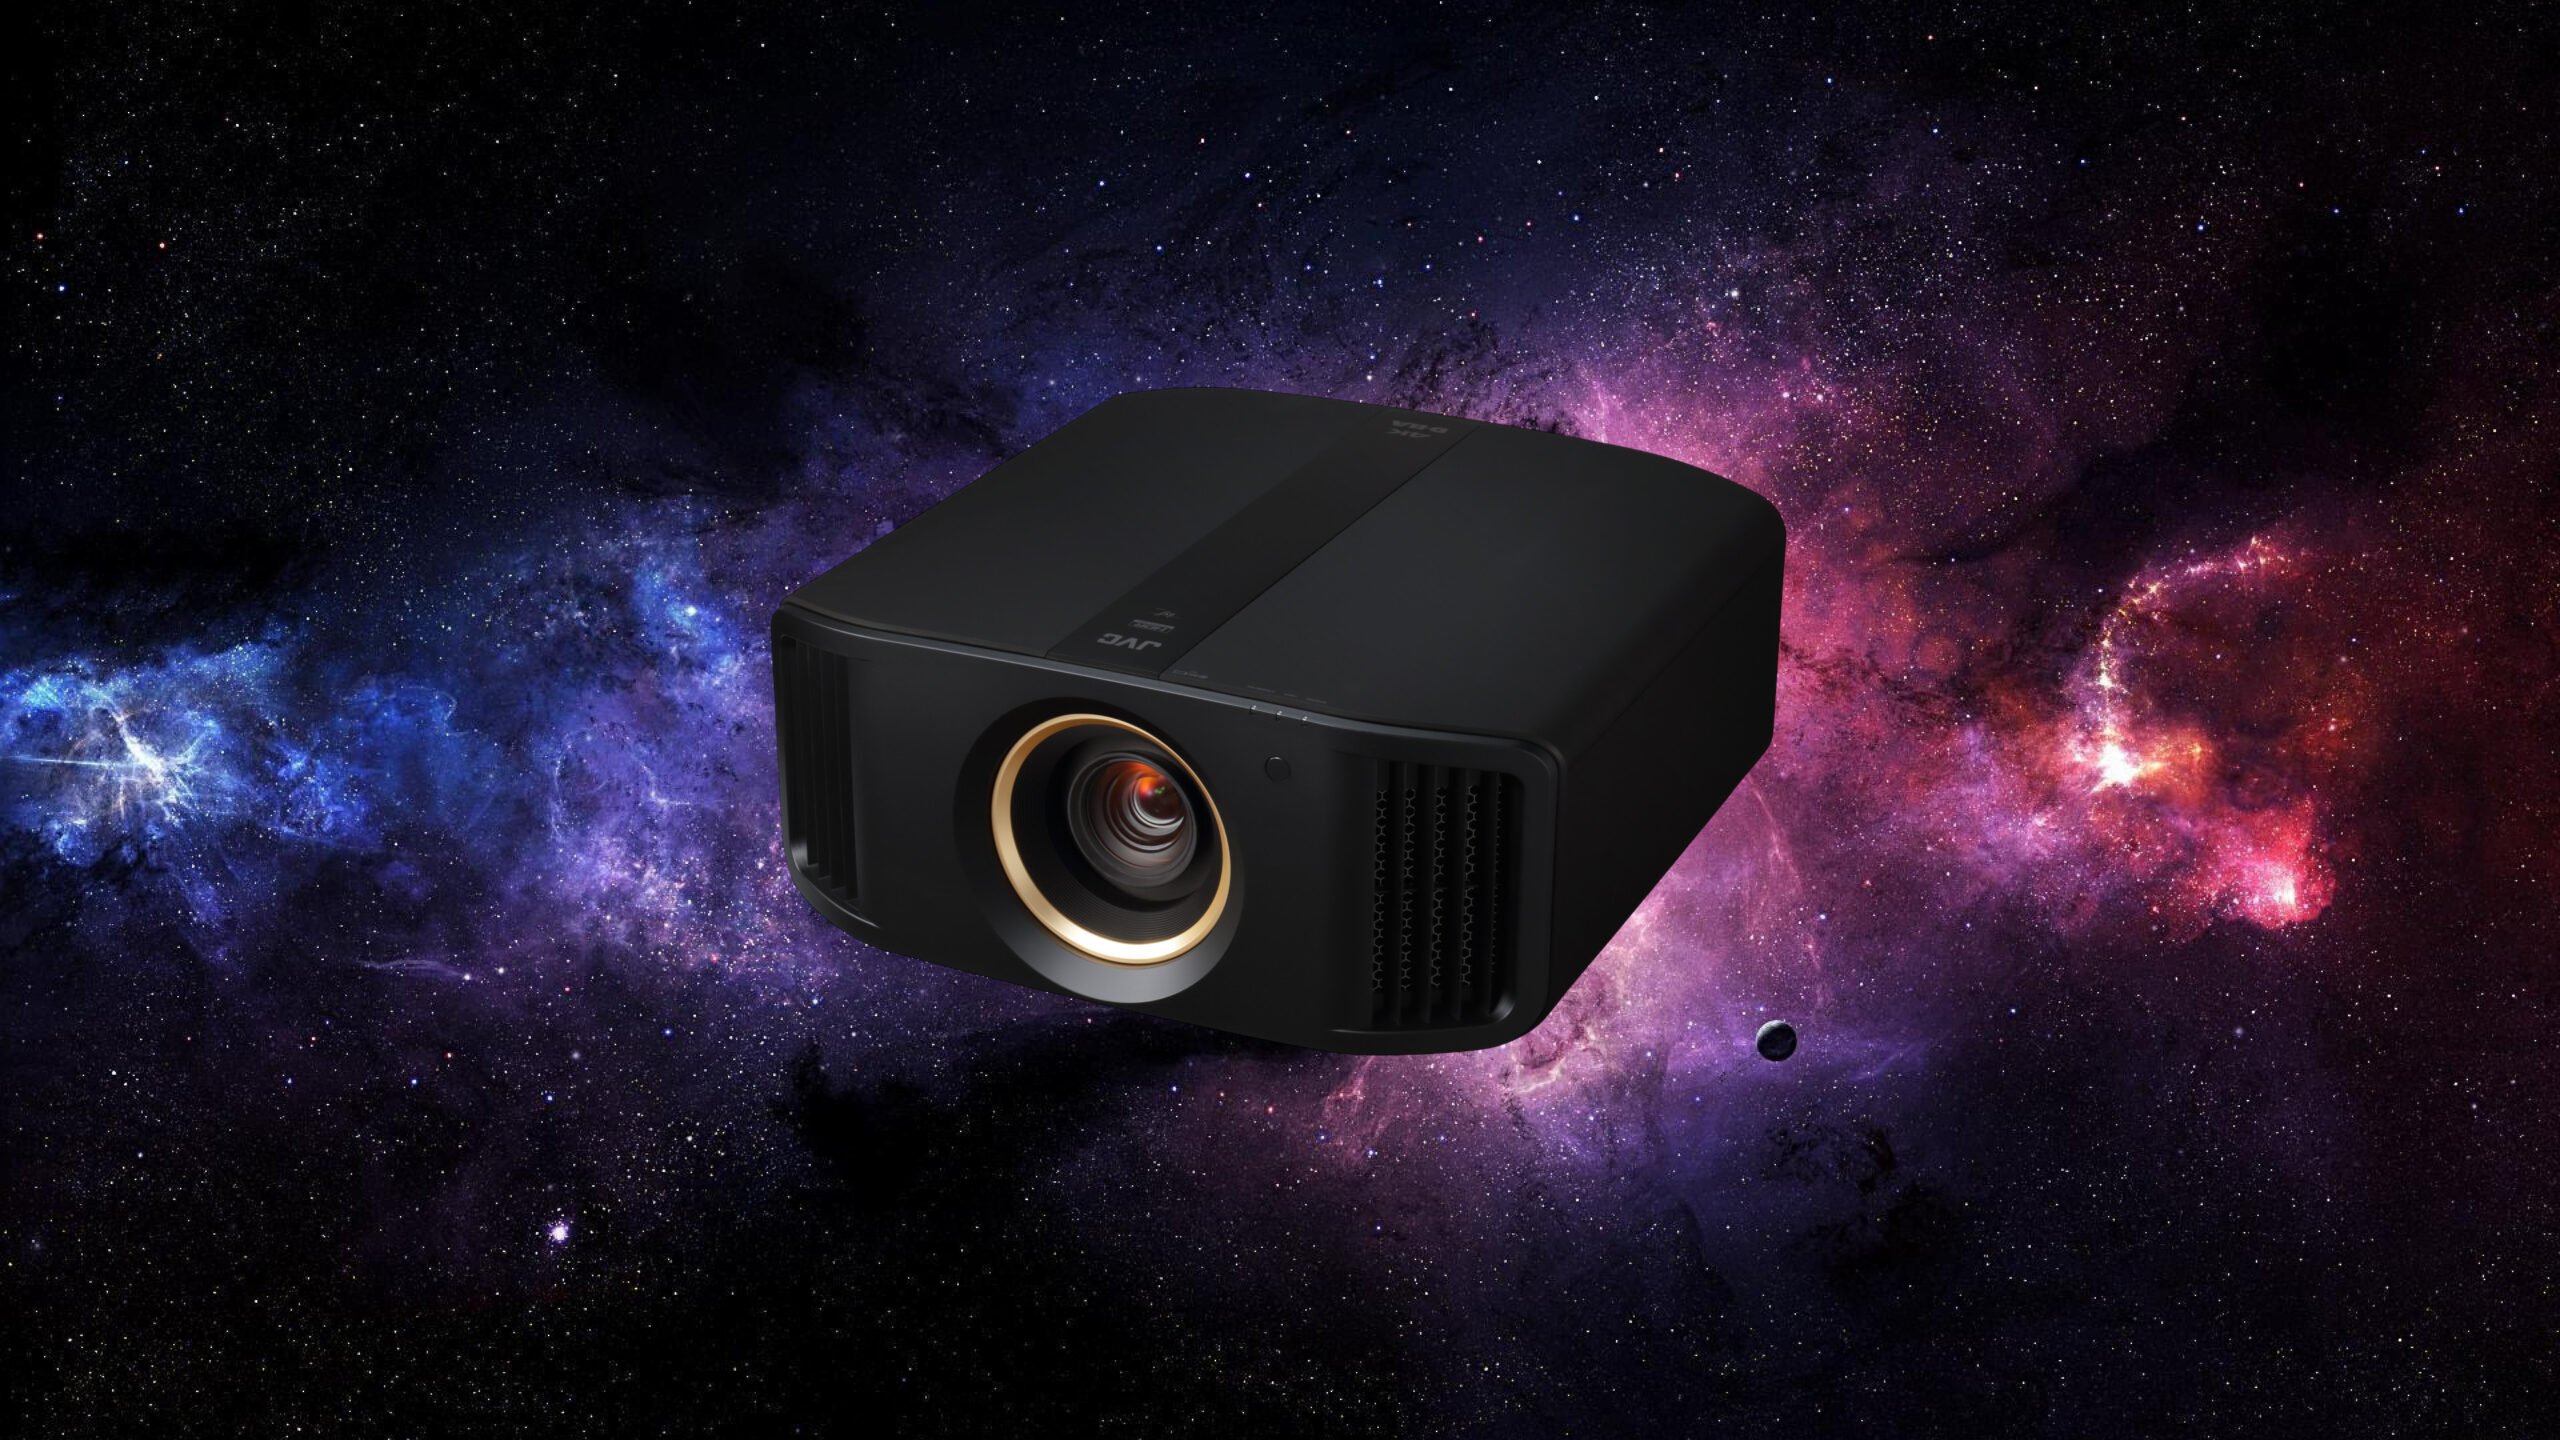 JVC DLA-RS1000 (DLA-NX5) 4K UHD Projector Review • Home Theater Forum |  Home Theater Forum